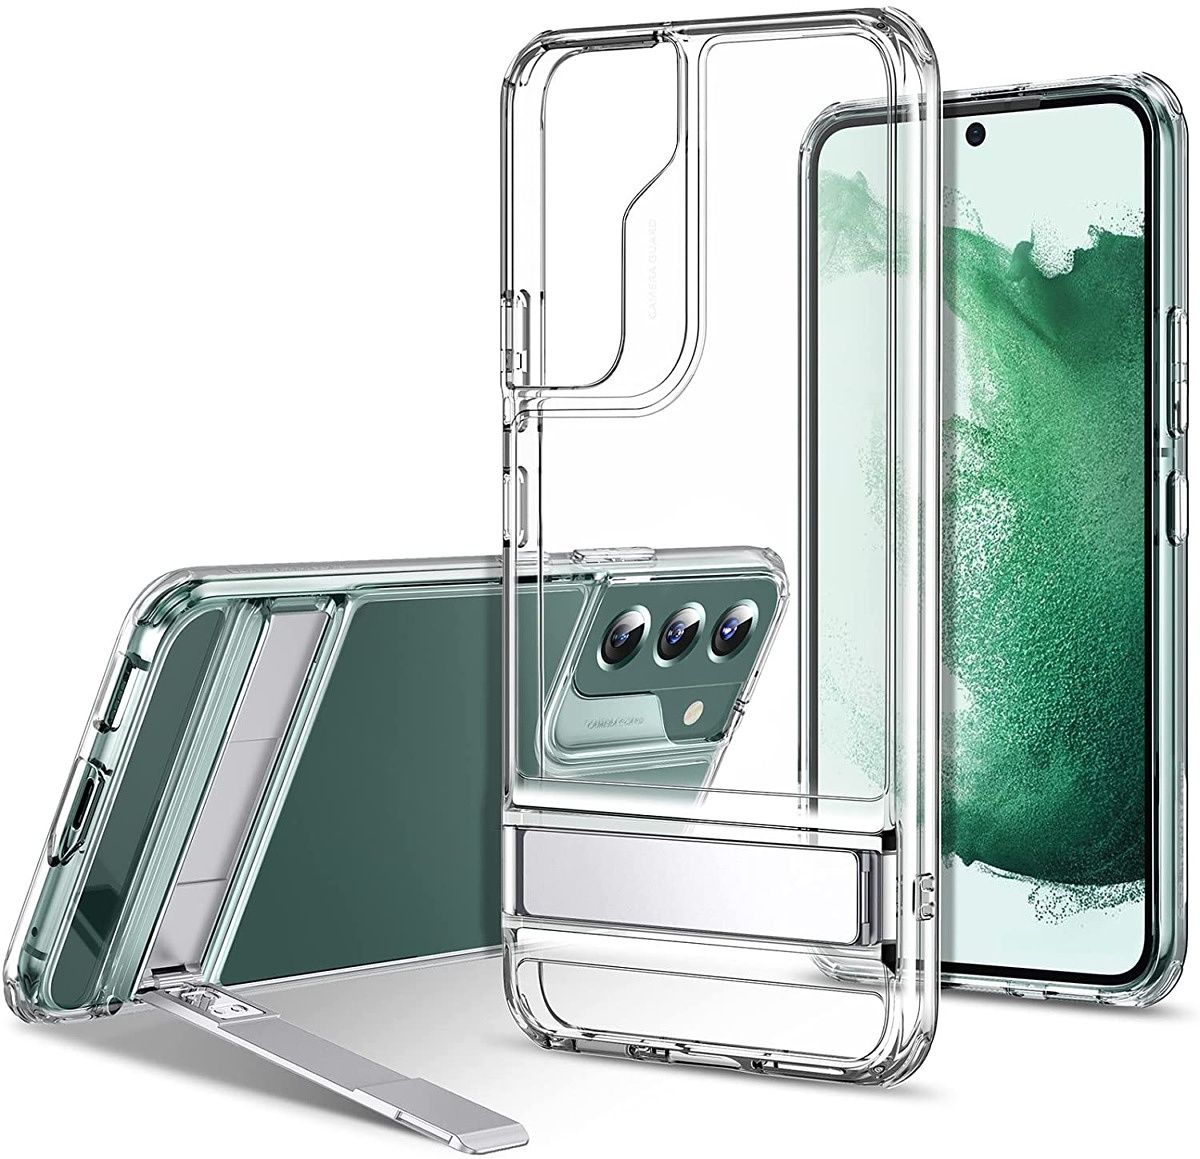 ESR is a well-known brand that makes some great cases, and the ESR Metal Kickstand case lets you show off your shiny new phone but also making it easier to use on the go. It can also hold your phone vertically.